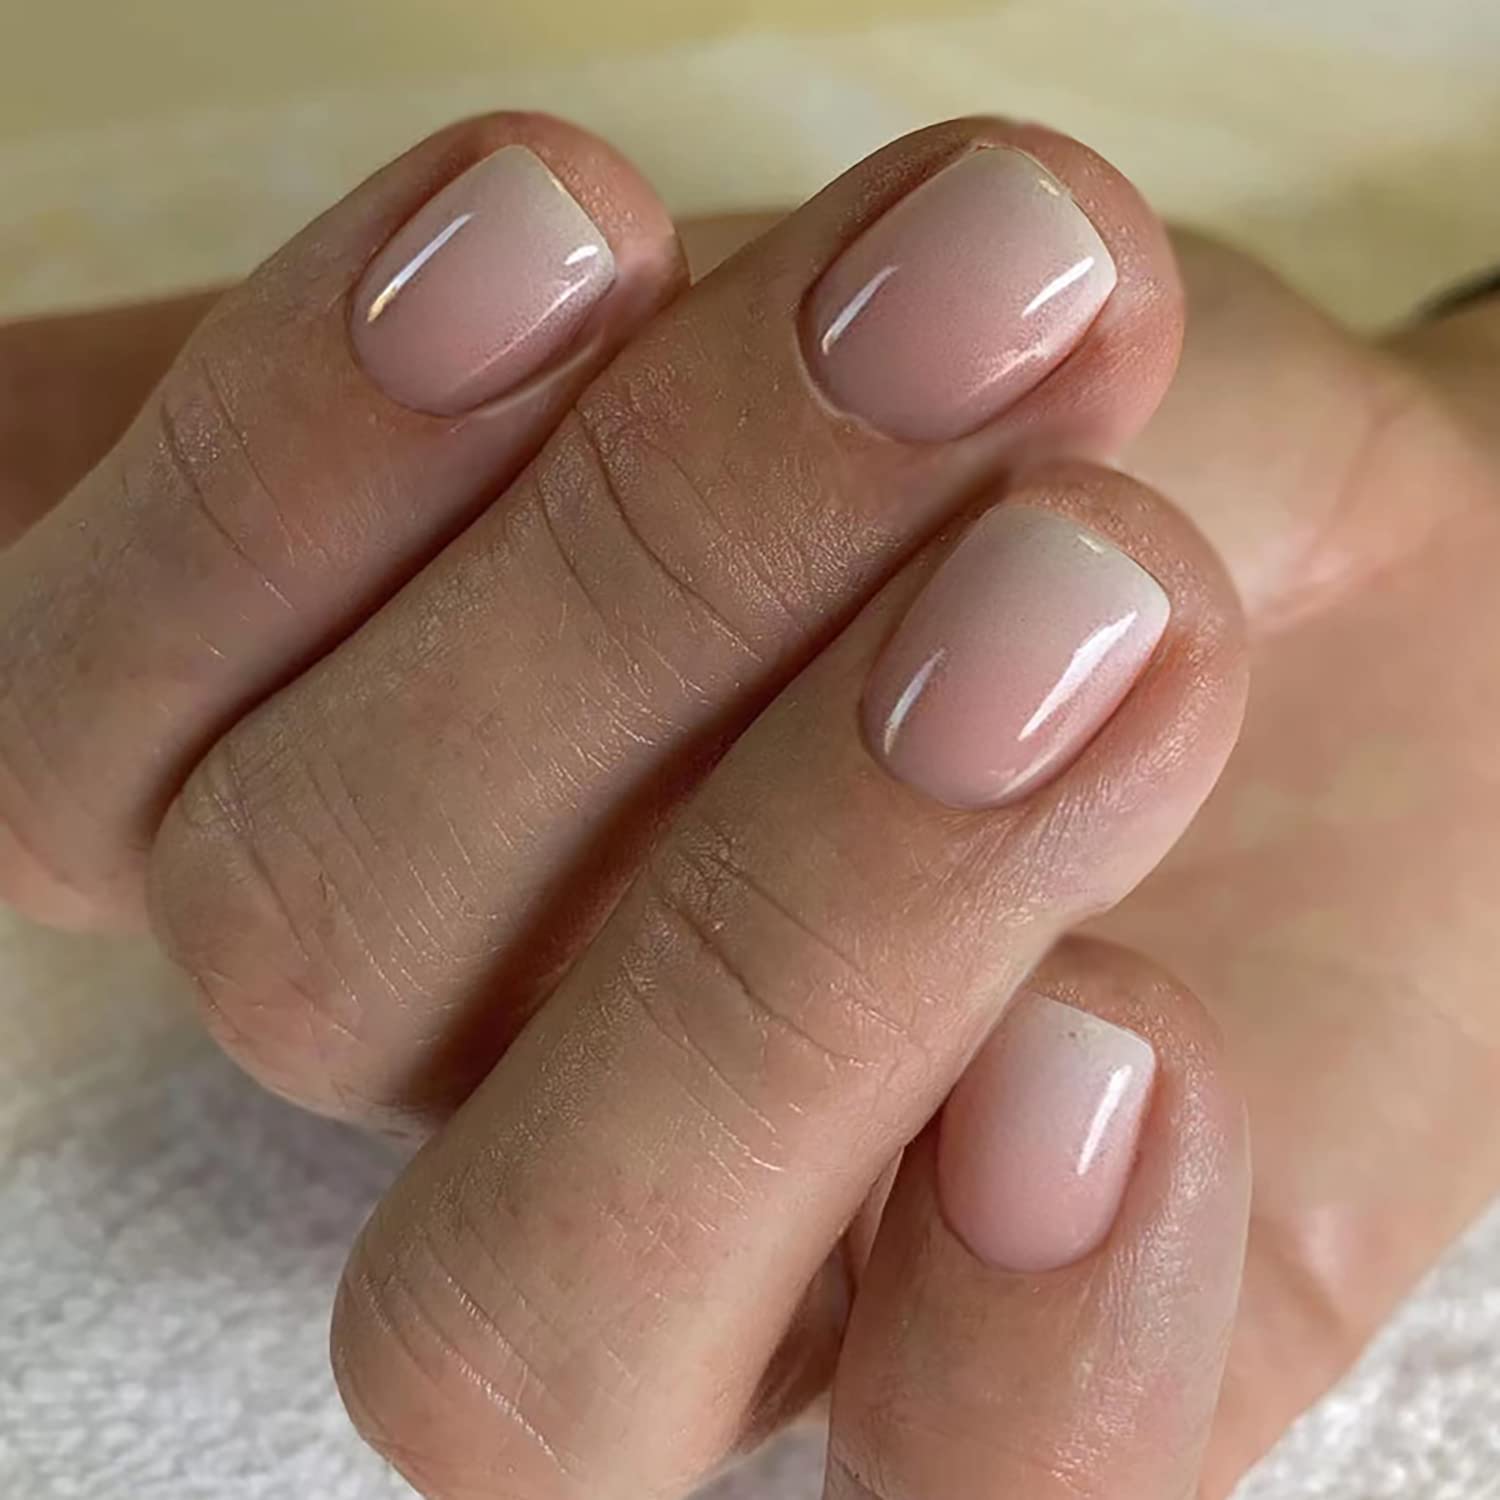 Acrylic Nails Short Square Ombre Fade / Baby Boomer Nails -  LongHairPrettyNails - YouTube